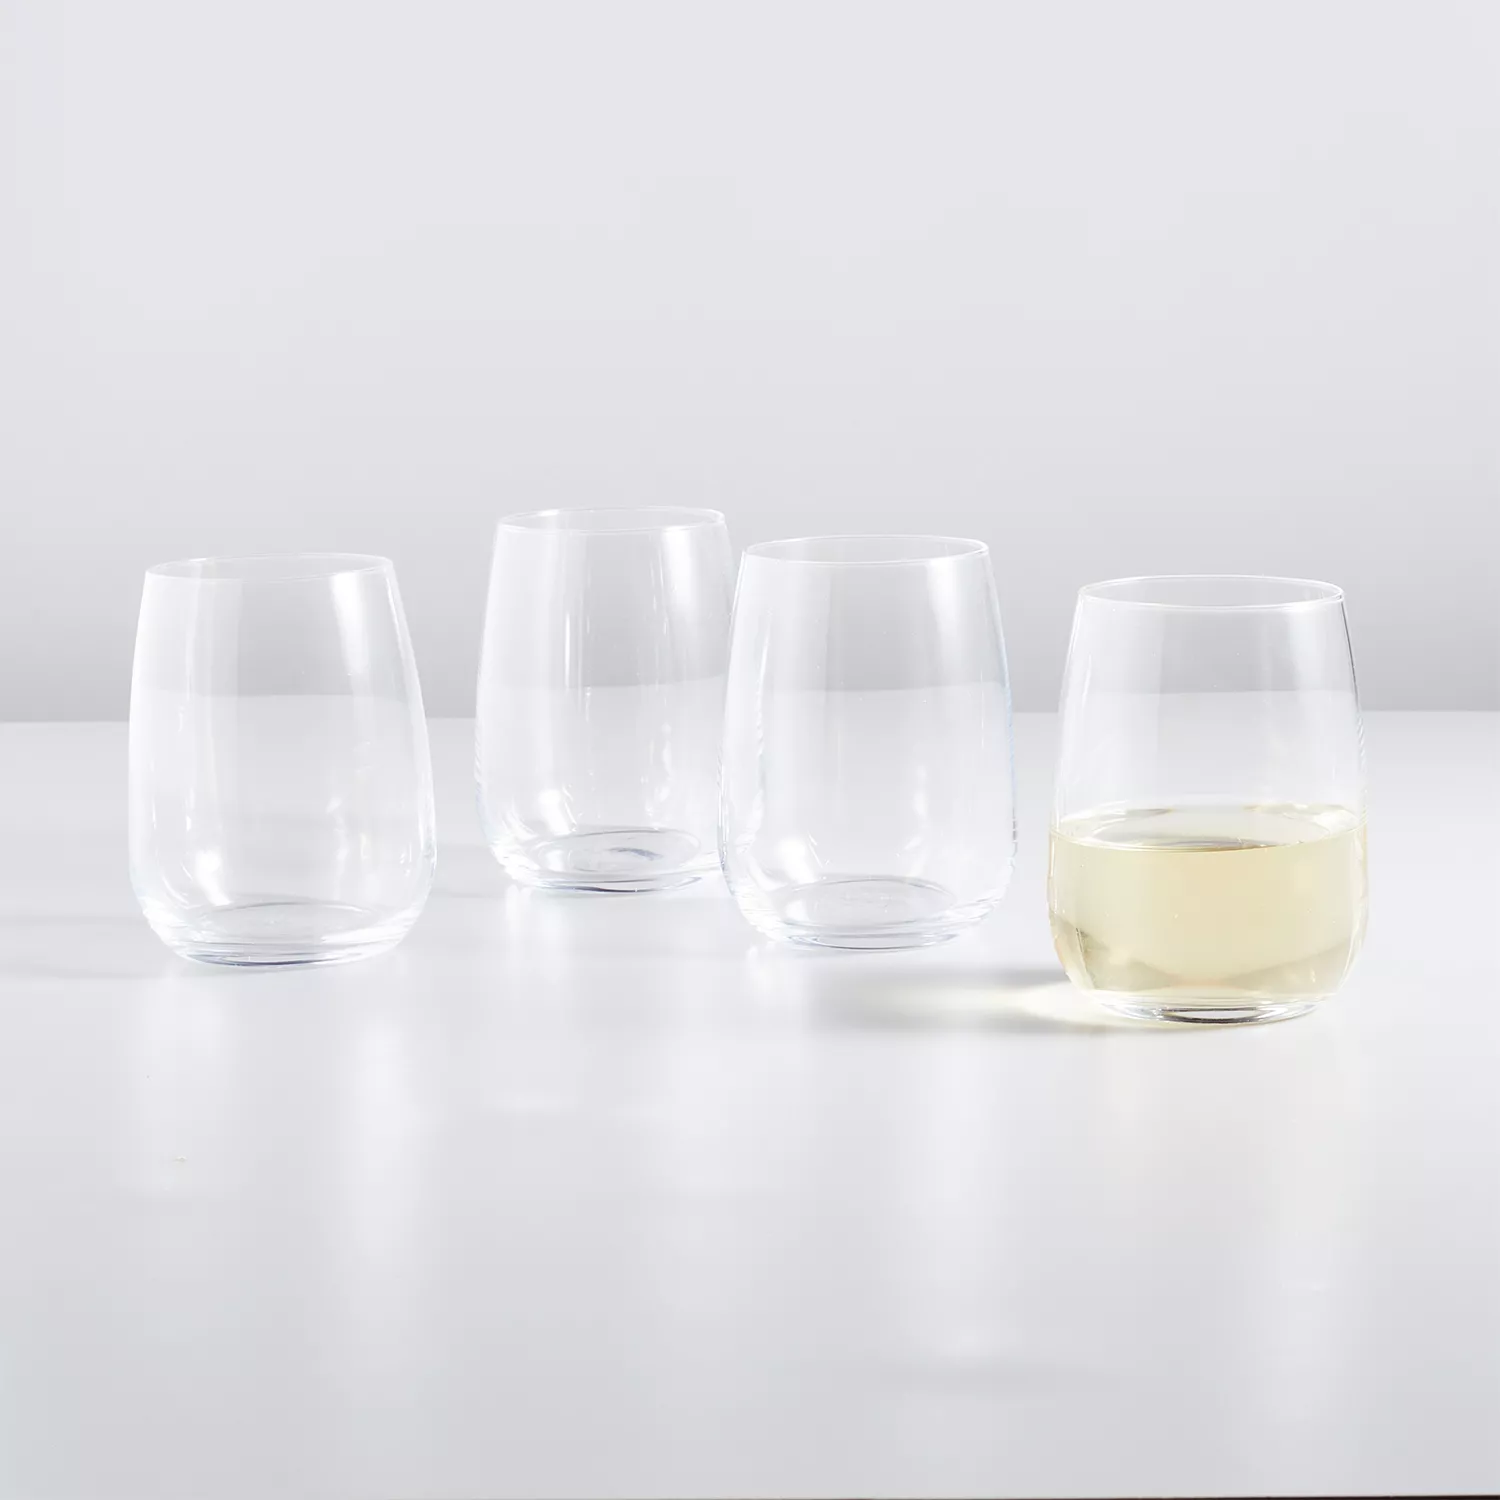 Anchor Hocking Stemless Red Wine Glasses Kitchen Essentials,  20 Oz: Wine Glasses: Wine Glasses